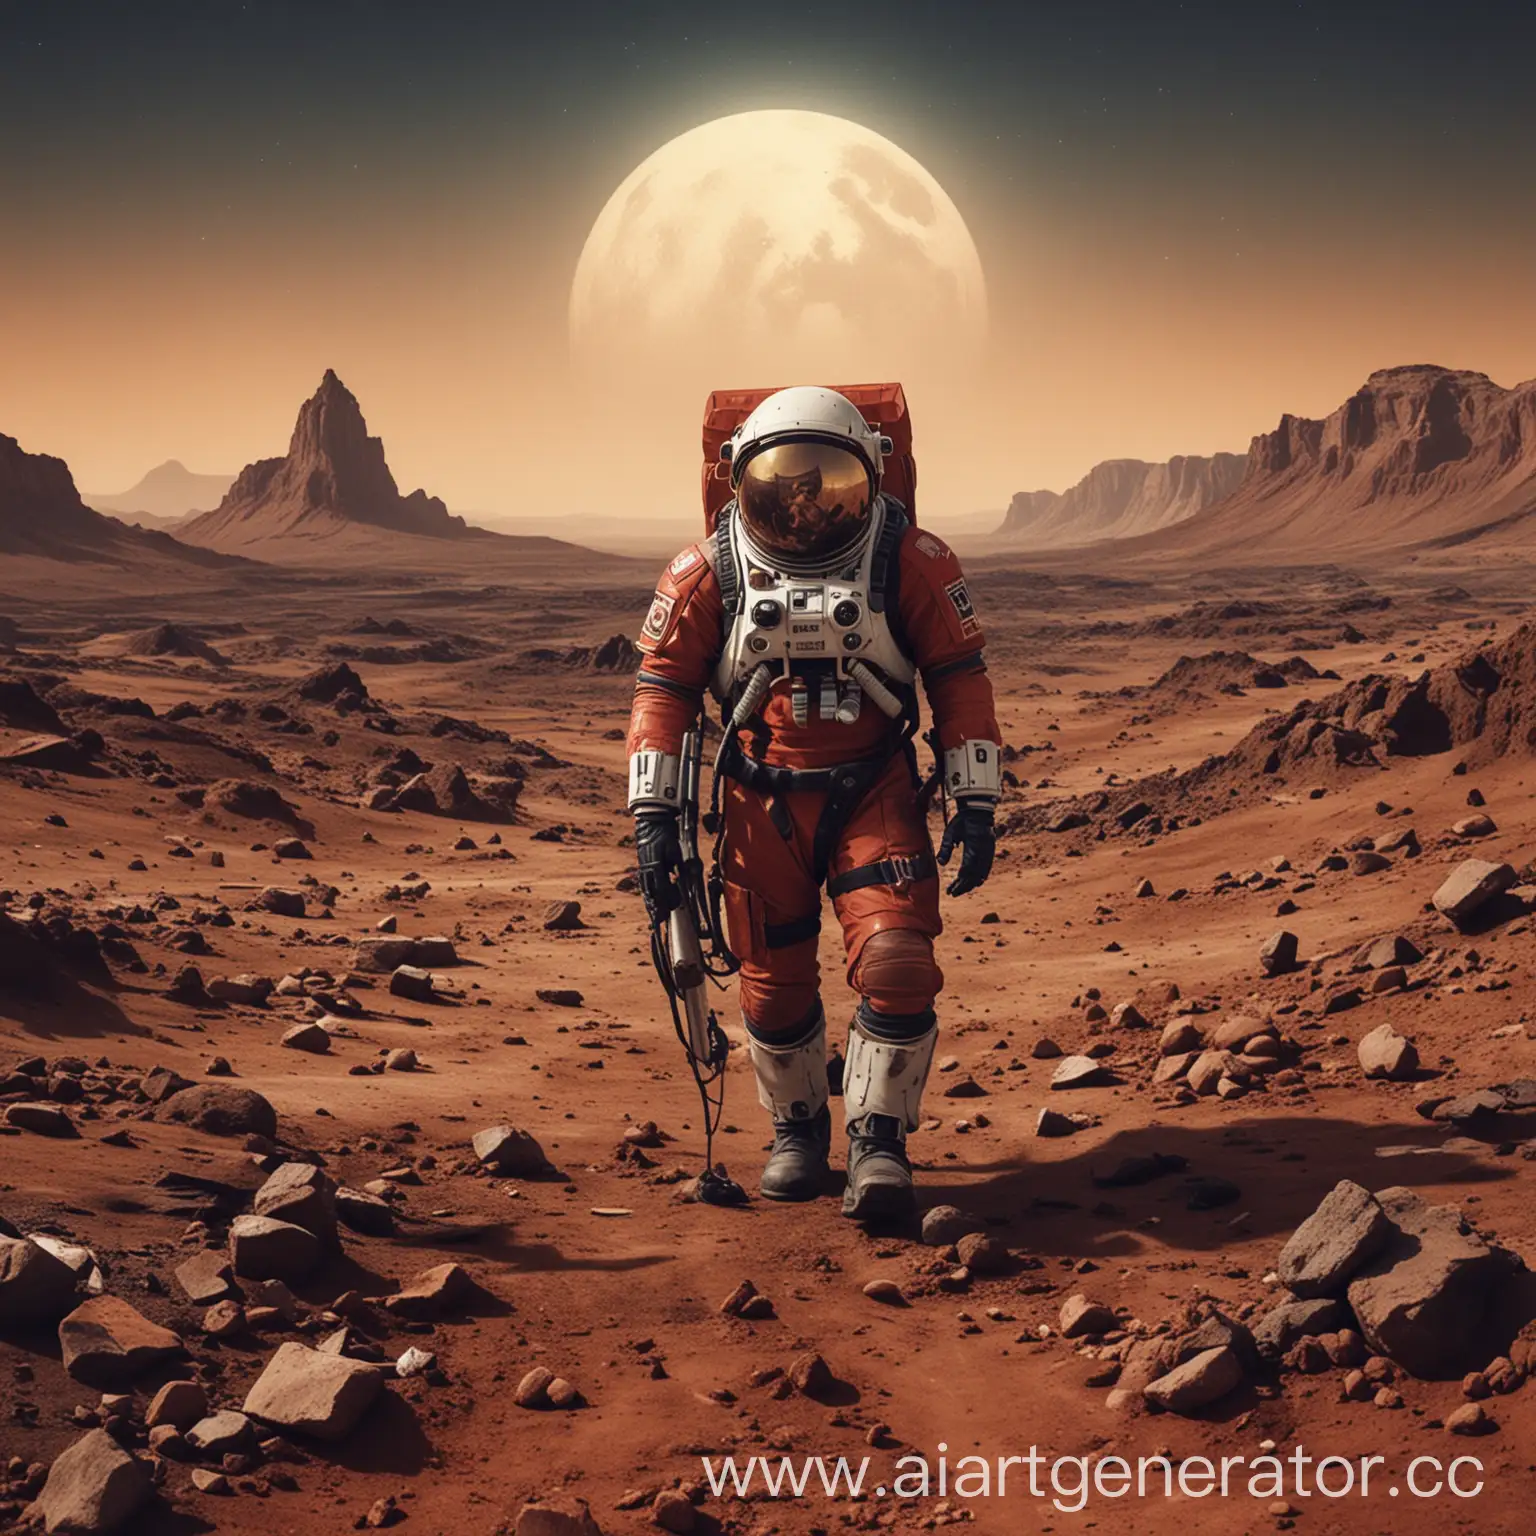 Exploring-Mars-with-a-Zombie-Astronaut-in-a-Spacesuit